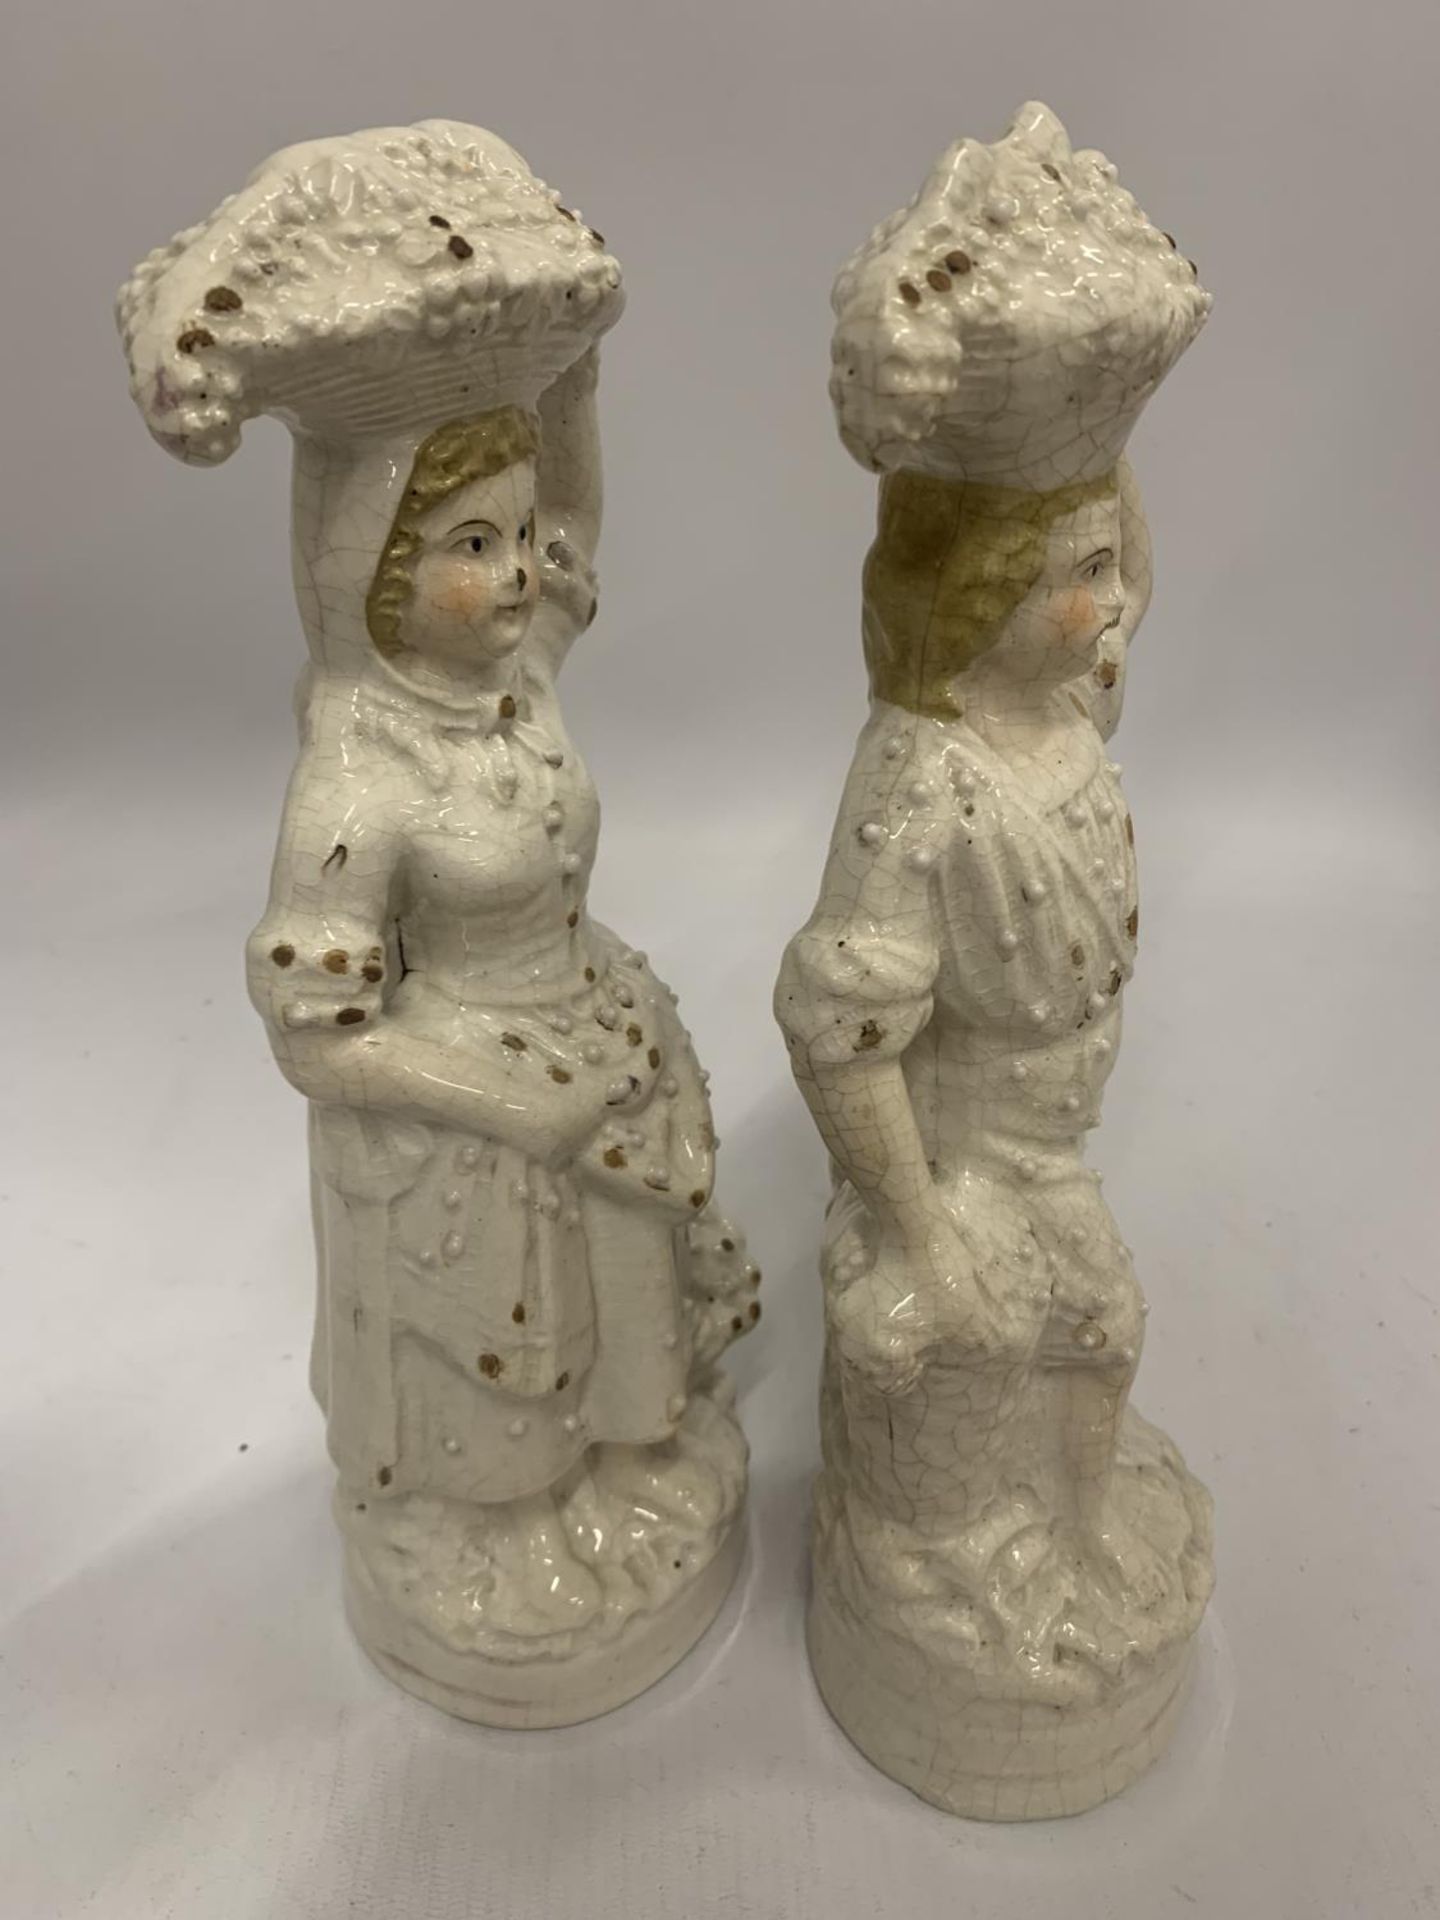 A PAIR OF EARLY STAFFORDSHIRE FIGURES - Image 2 of 4